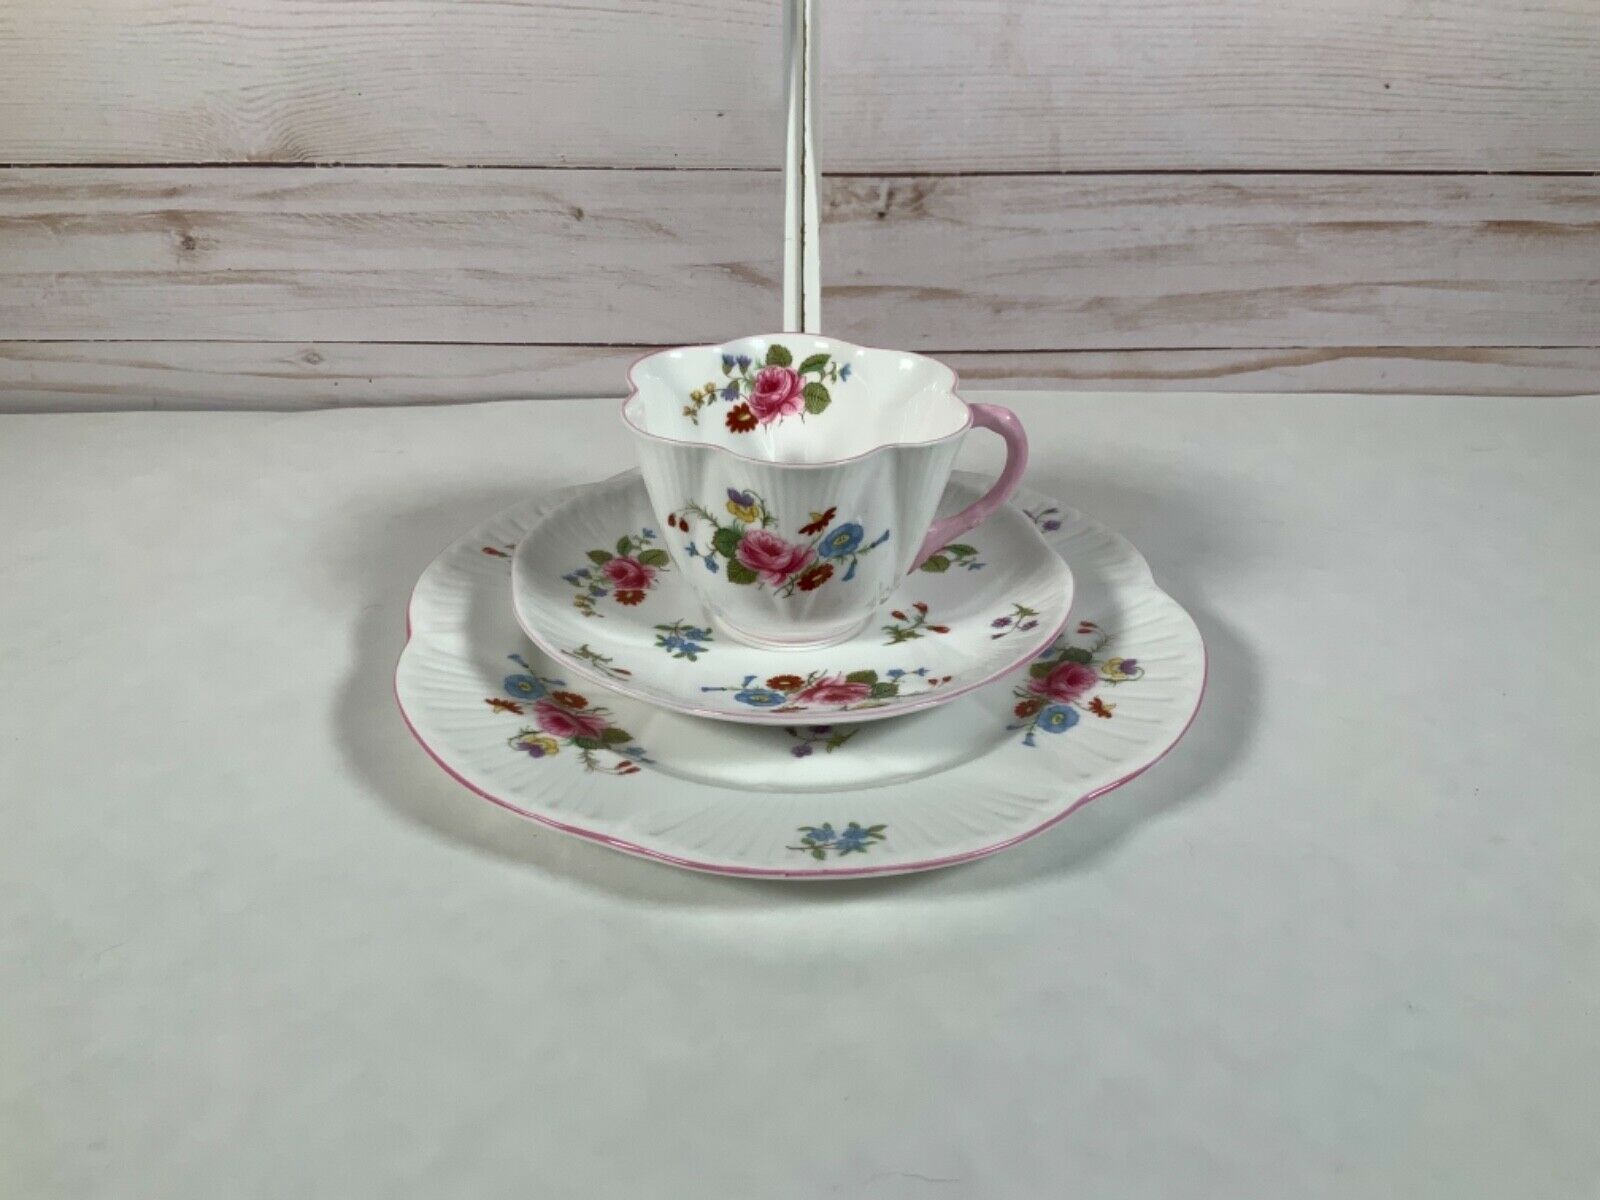 Shelley Rose Red Daisy Dainty Trio Salad / Dessert Plate Cup And Saucer 13425